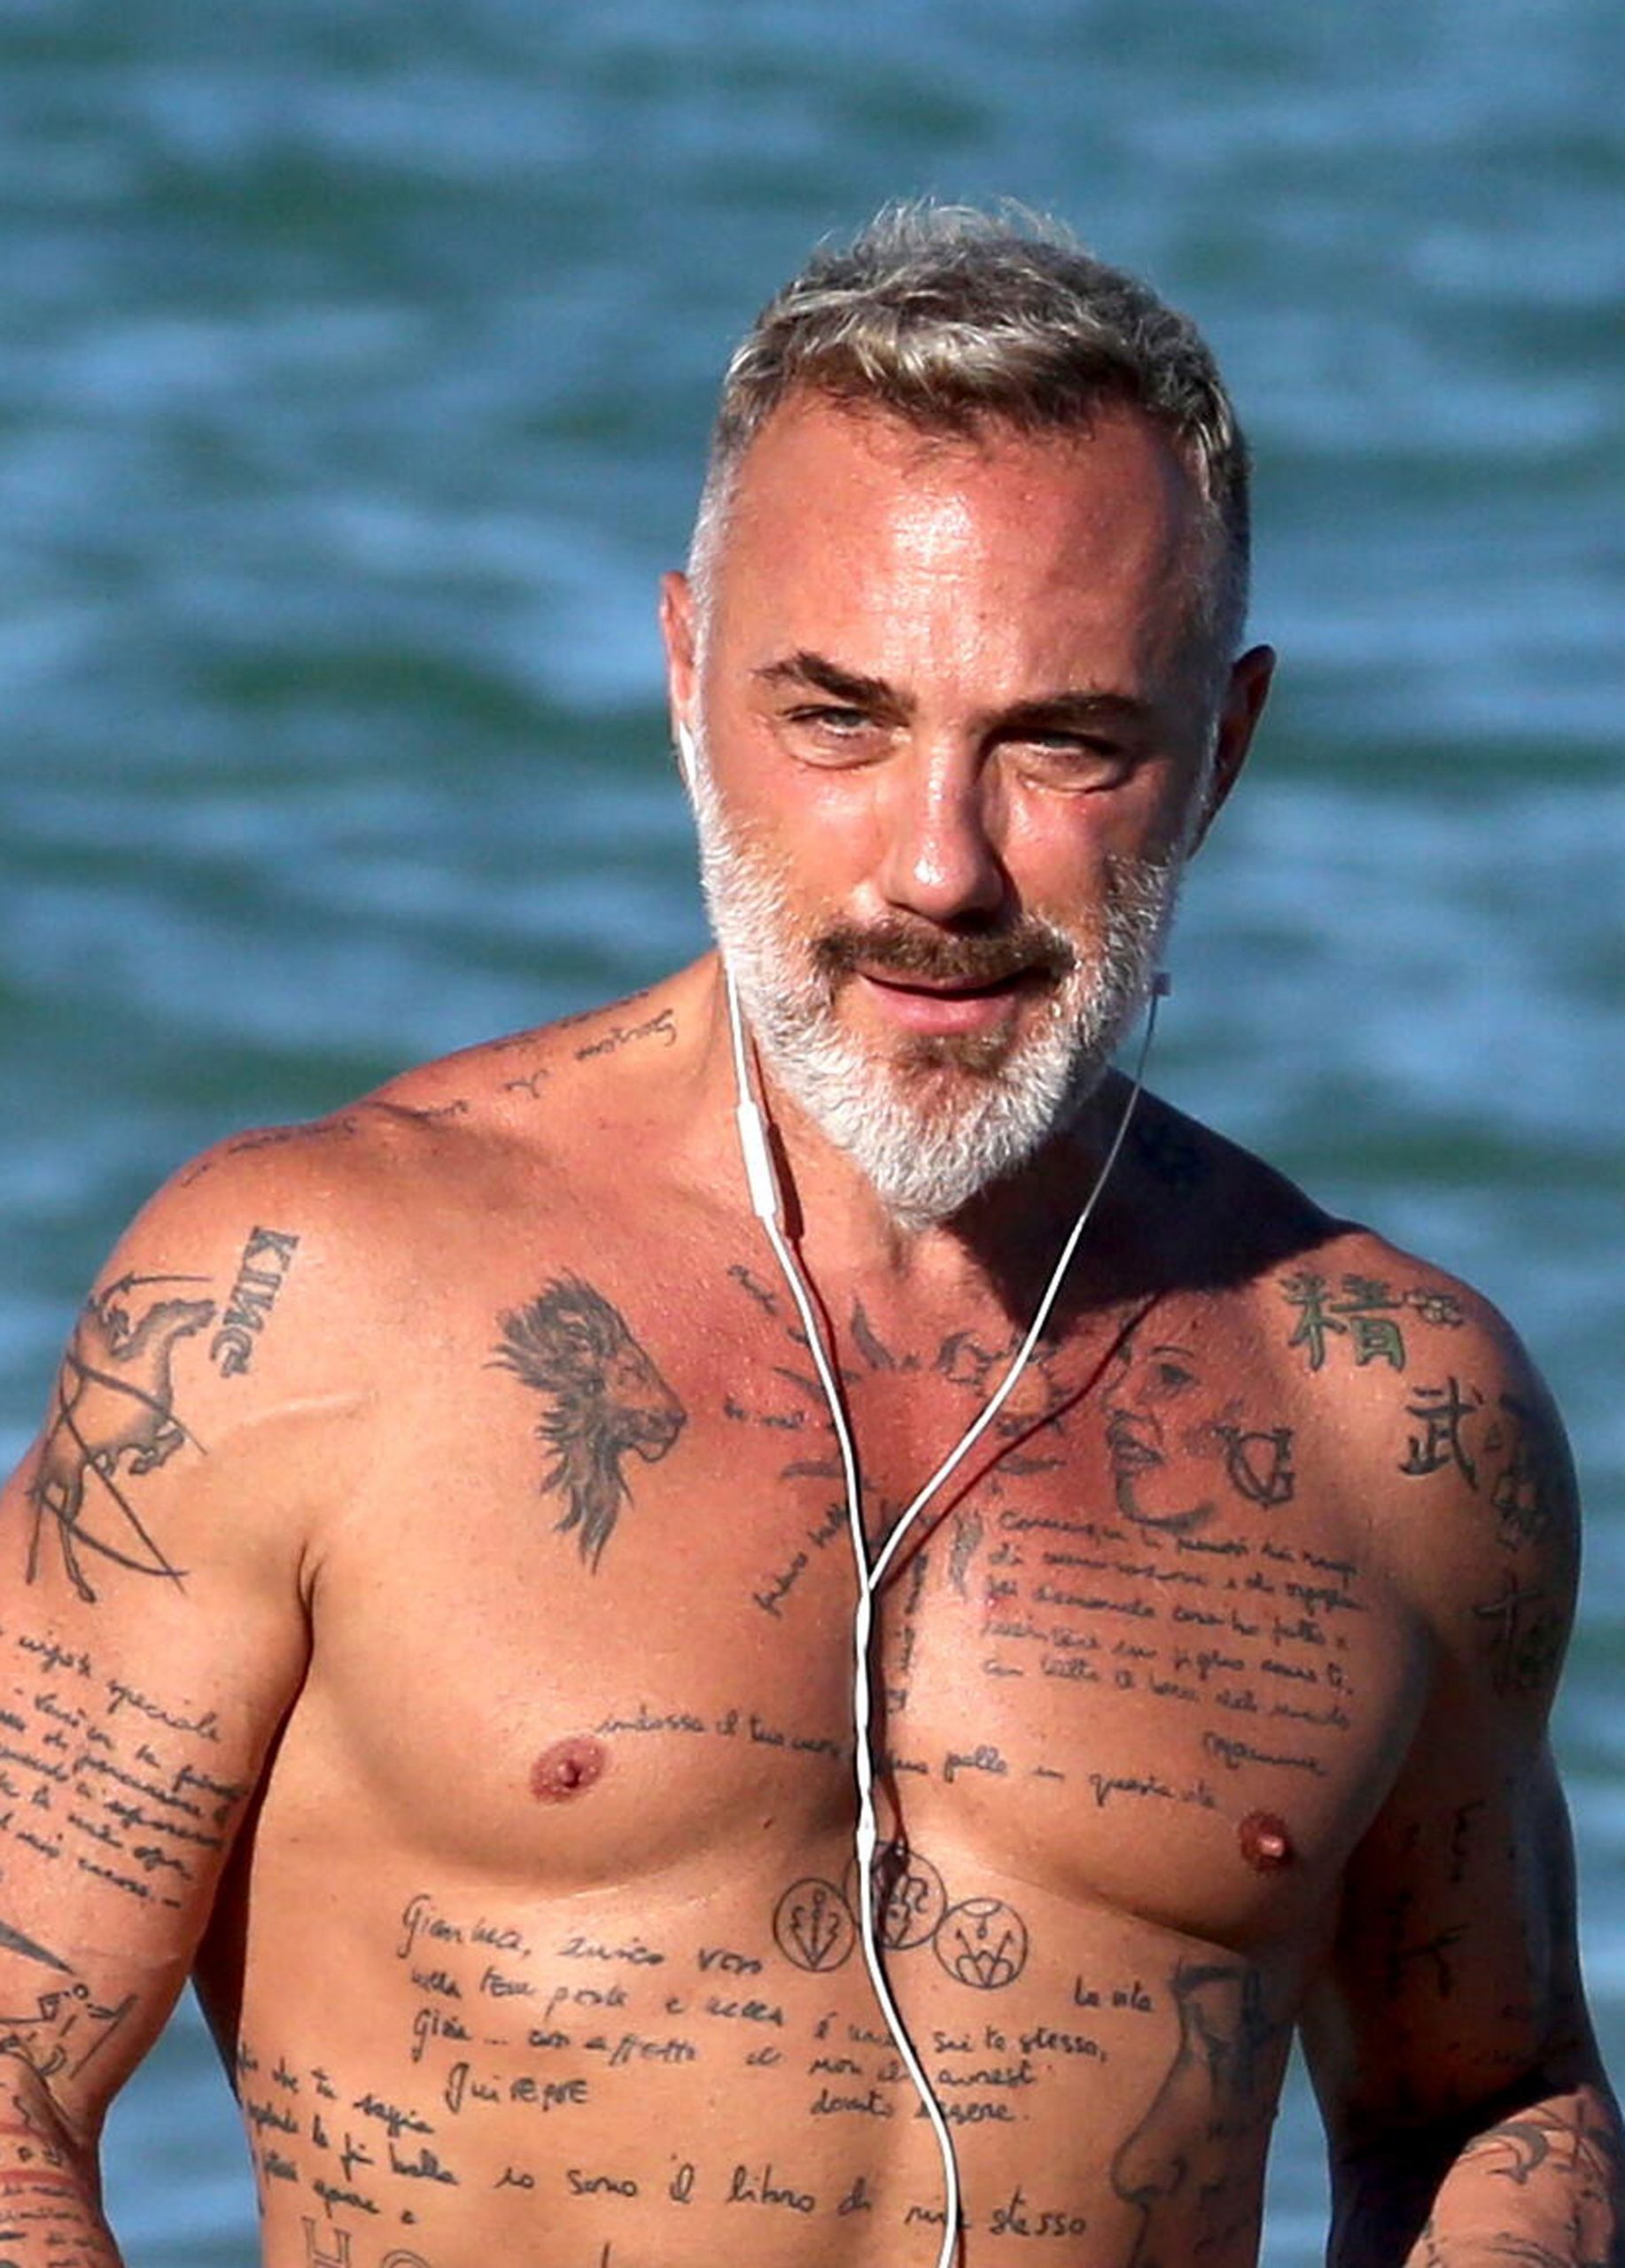 Gianluca Vacchi - Age | Height | Weight | Images | Bio